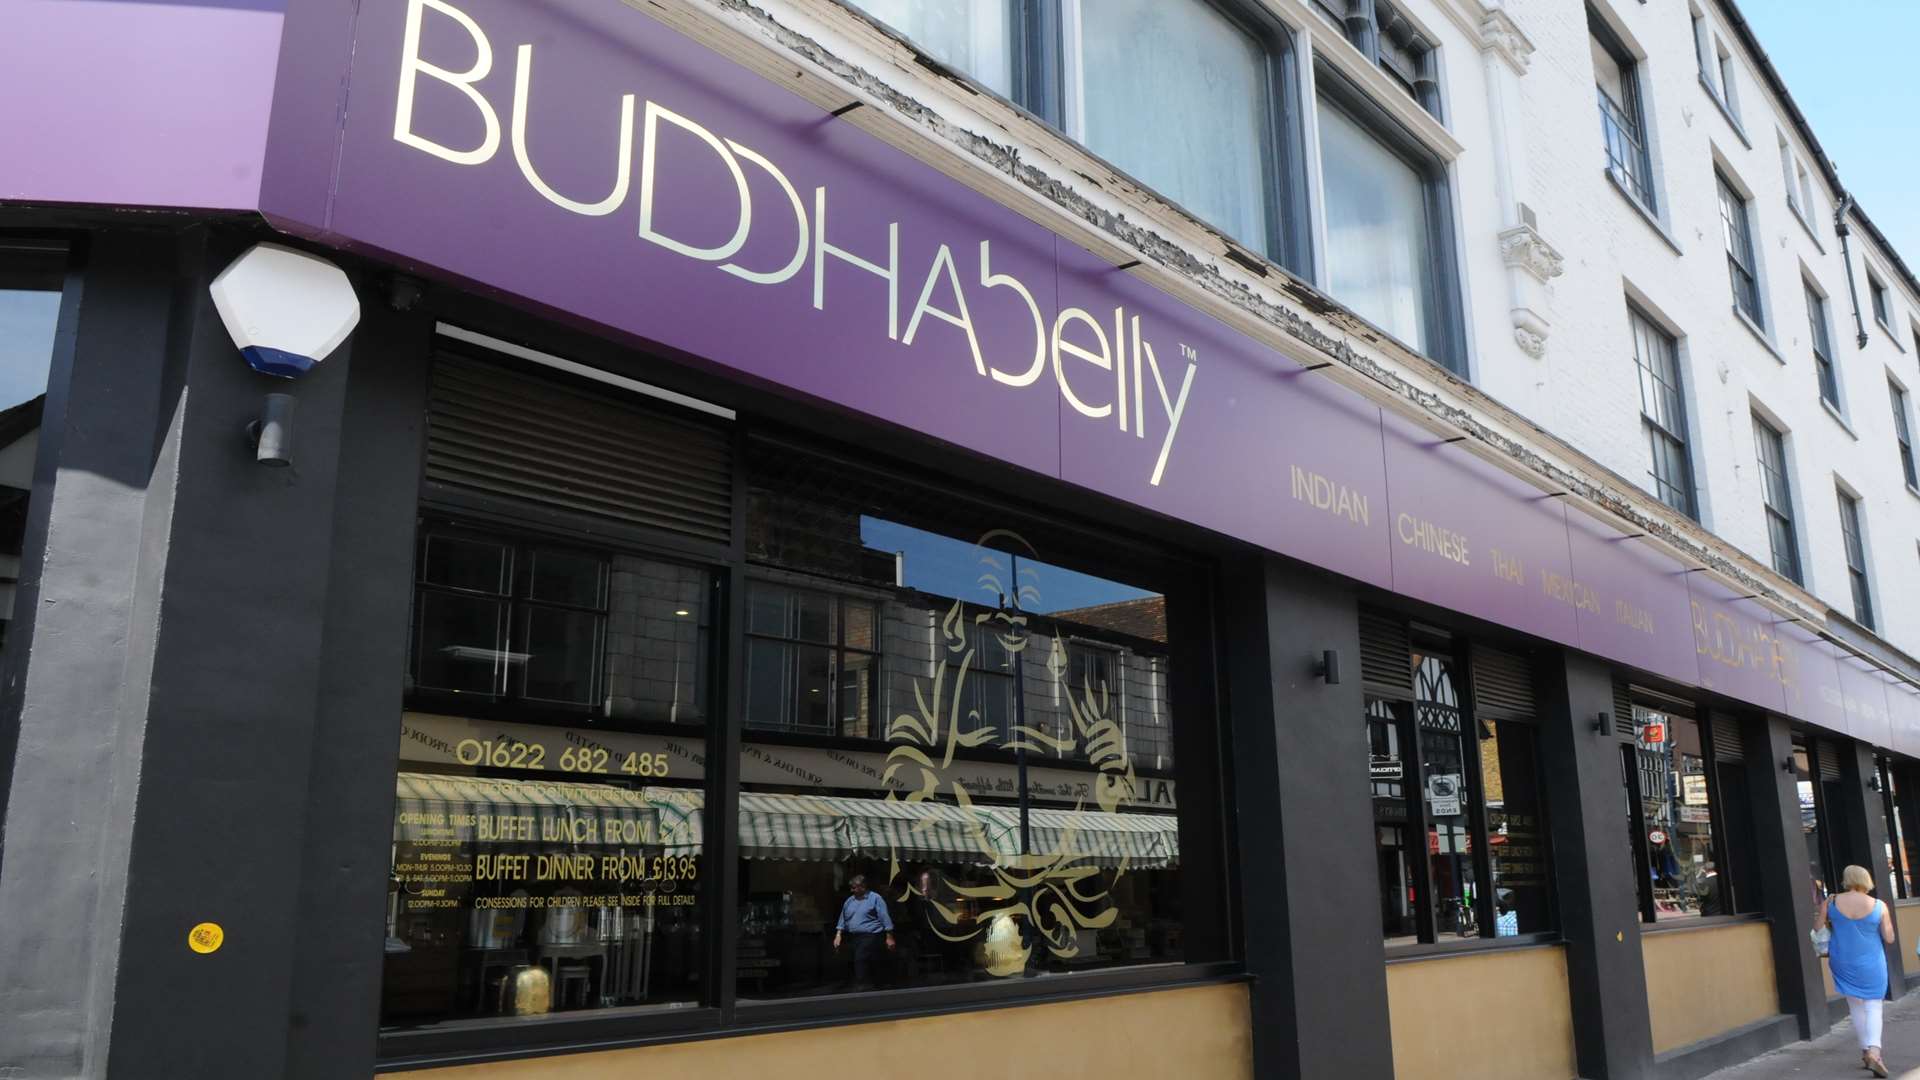 The Buddha Belly restaurant in Maidstone town centre